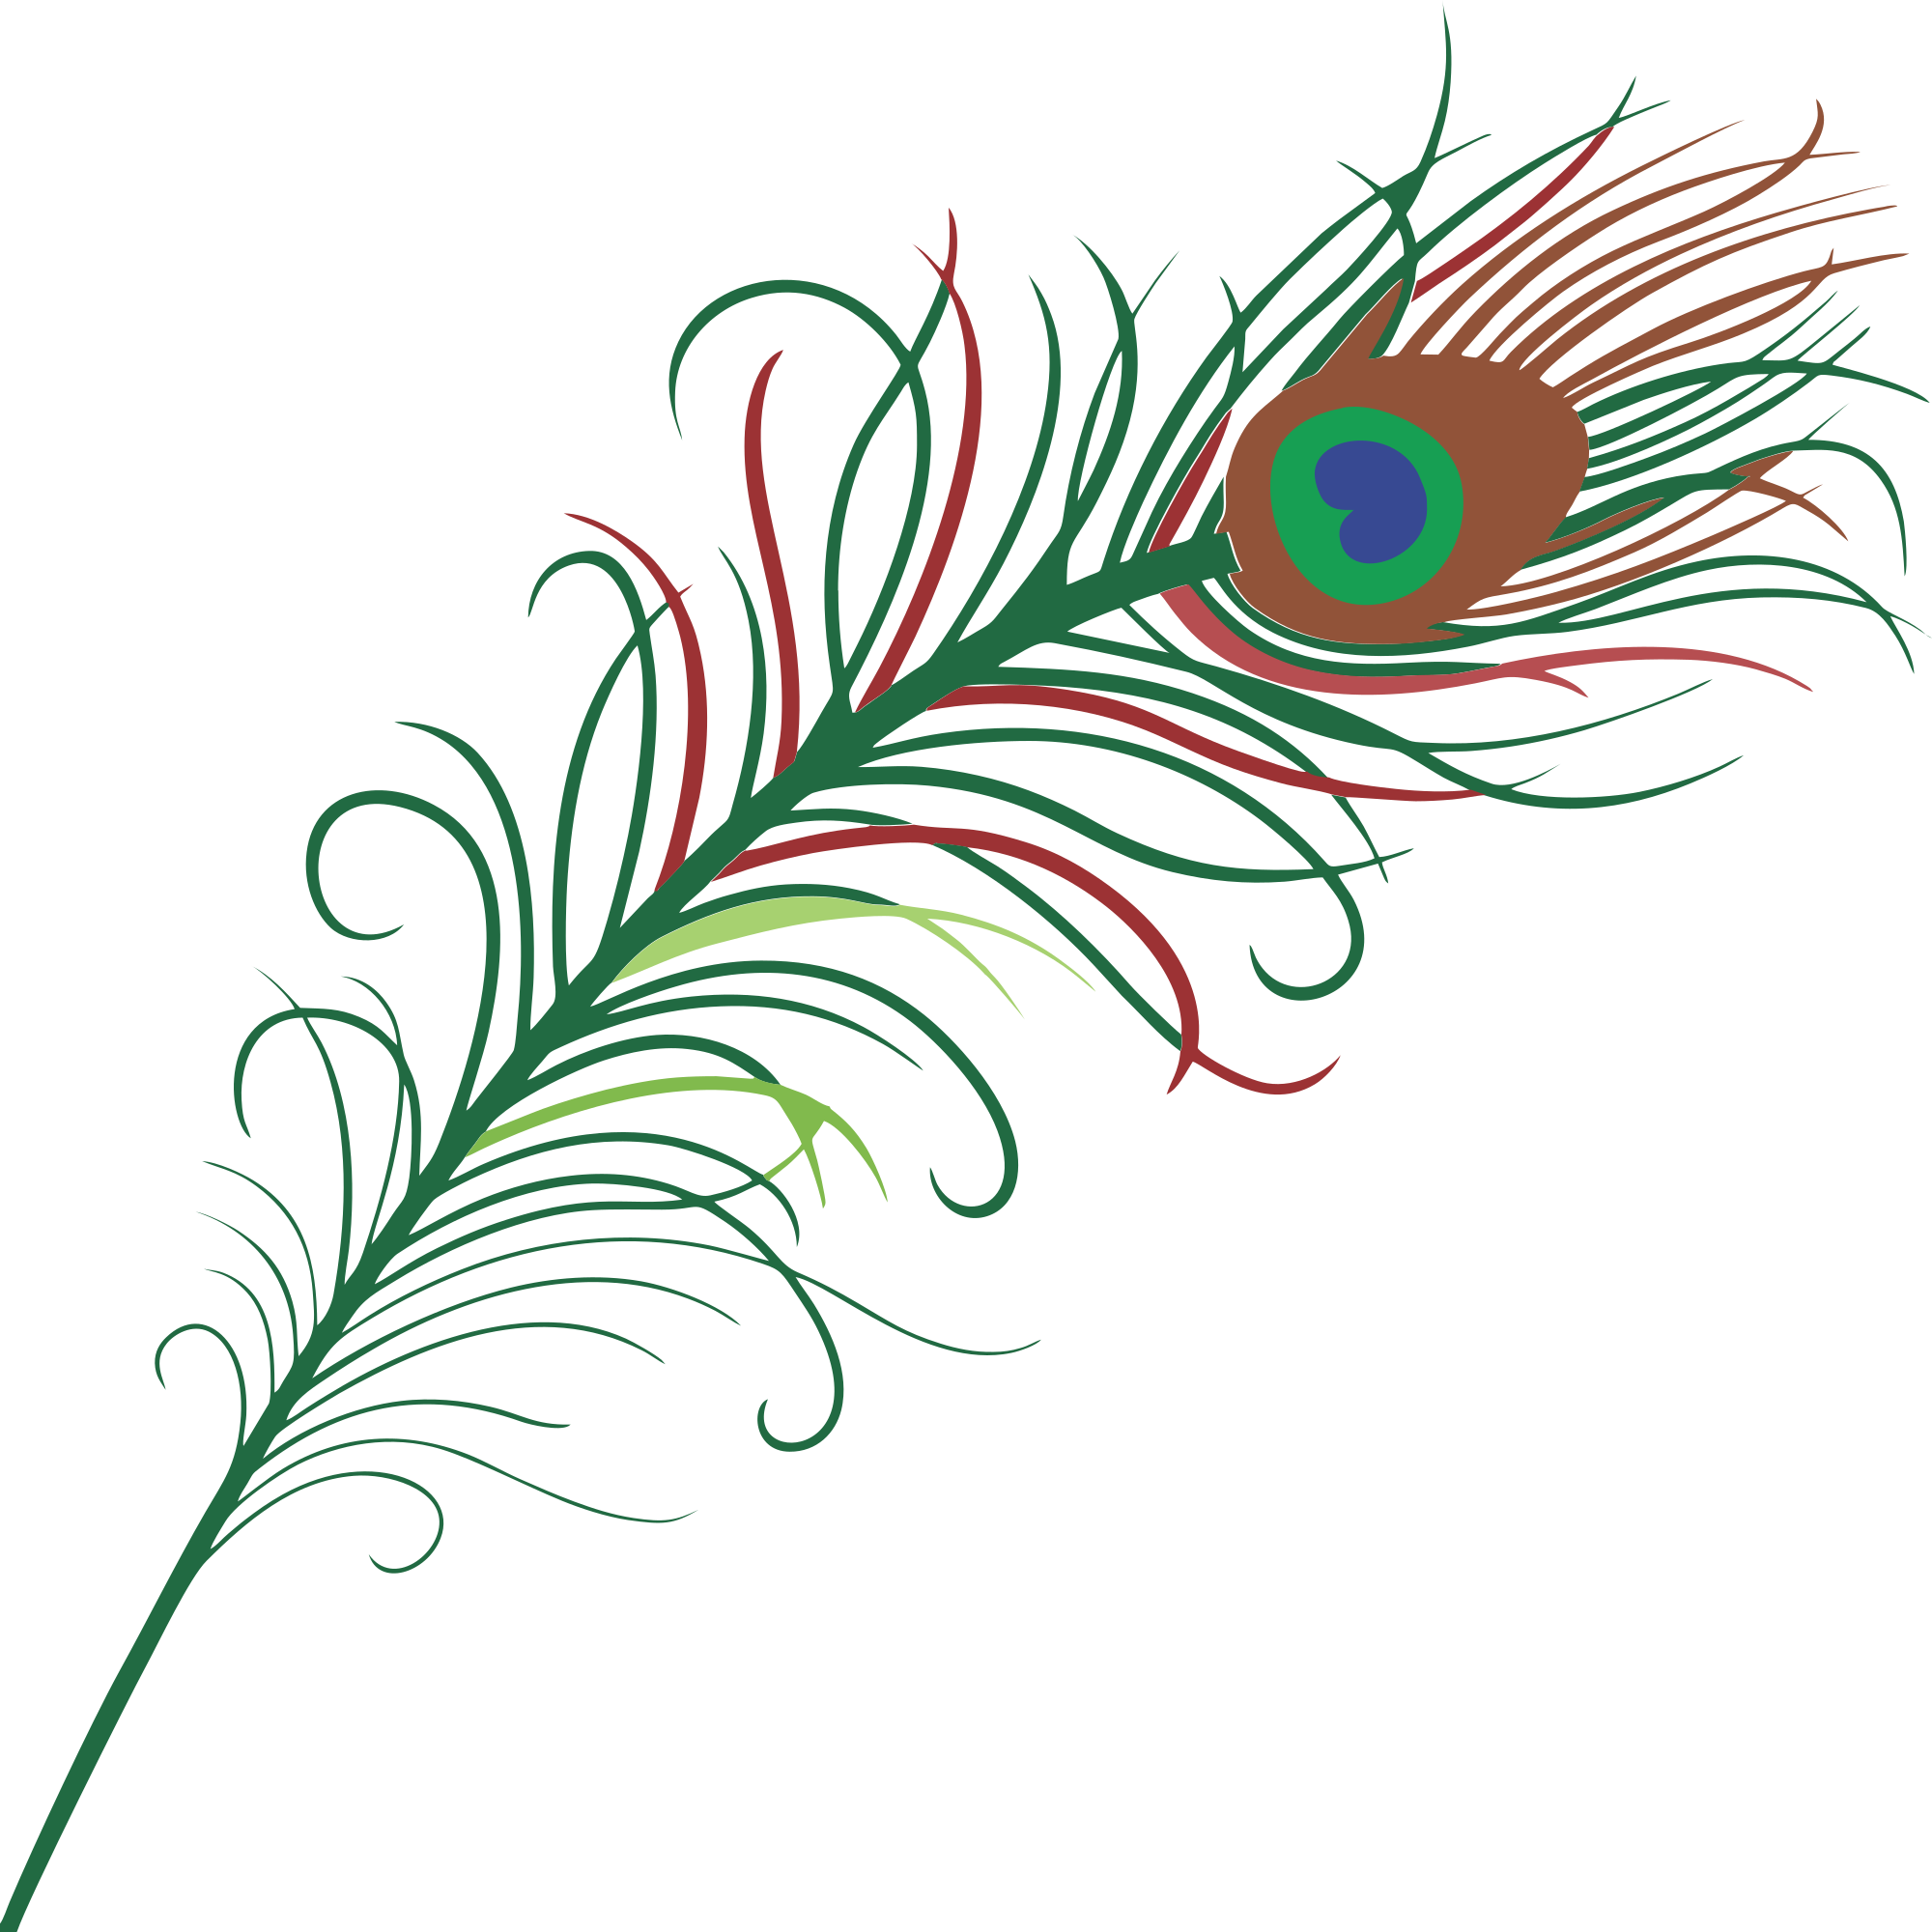 Peacock feather border clipart free images clipartix